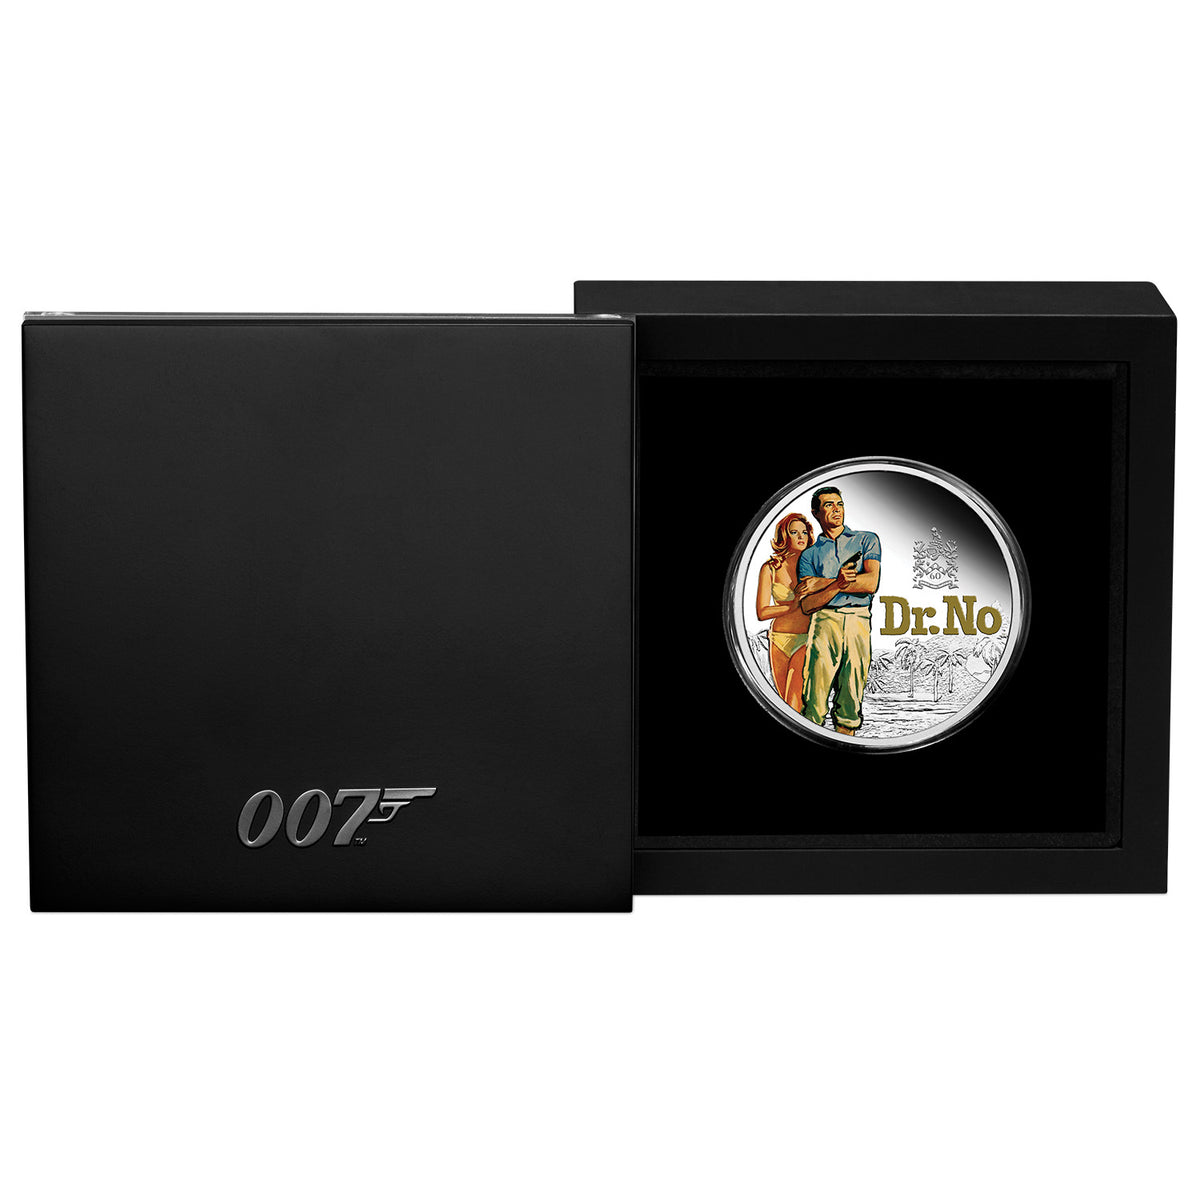 James Bond Dr. No 1oz Silver Coin with Colour - Limited Edition - By The Perth Mint